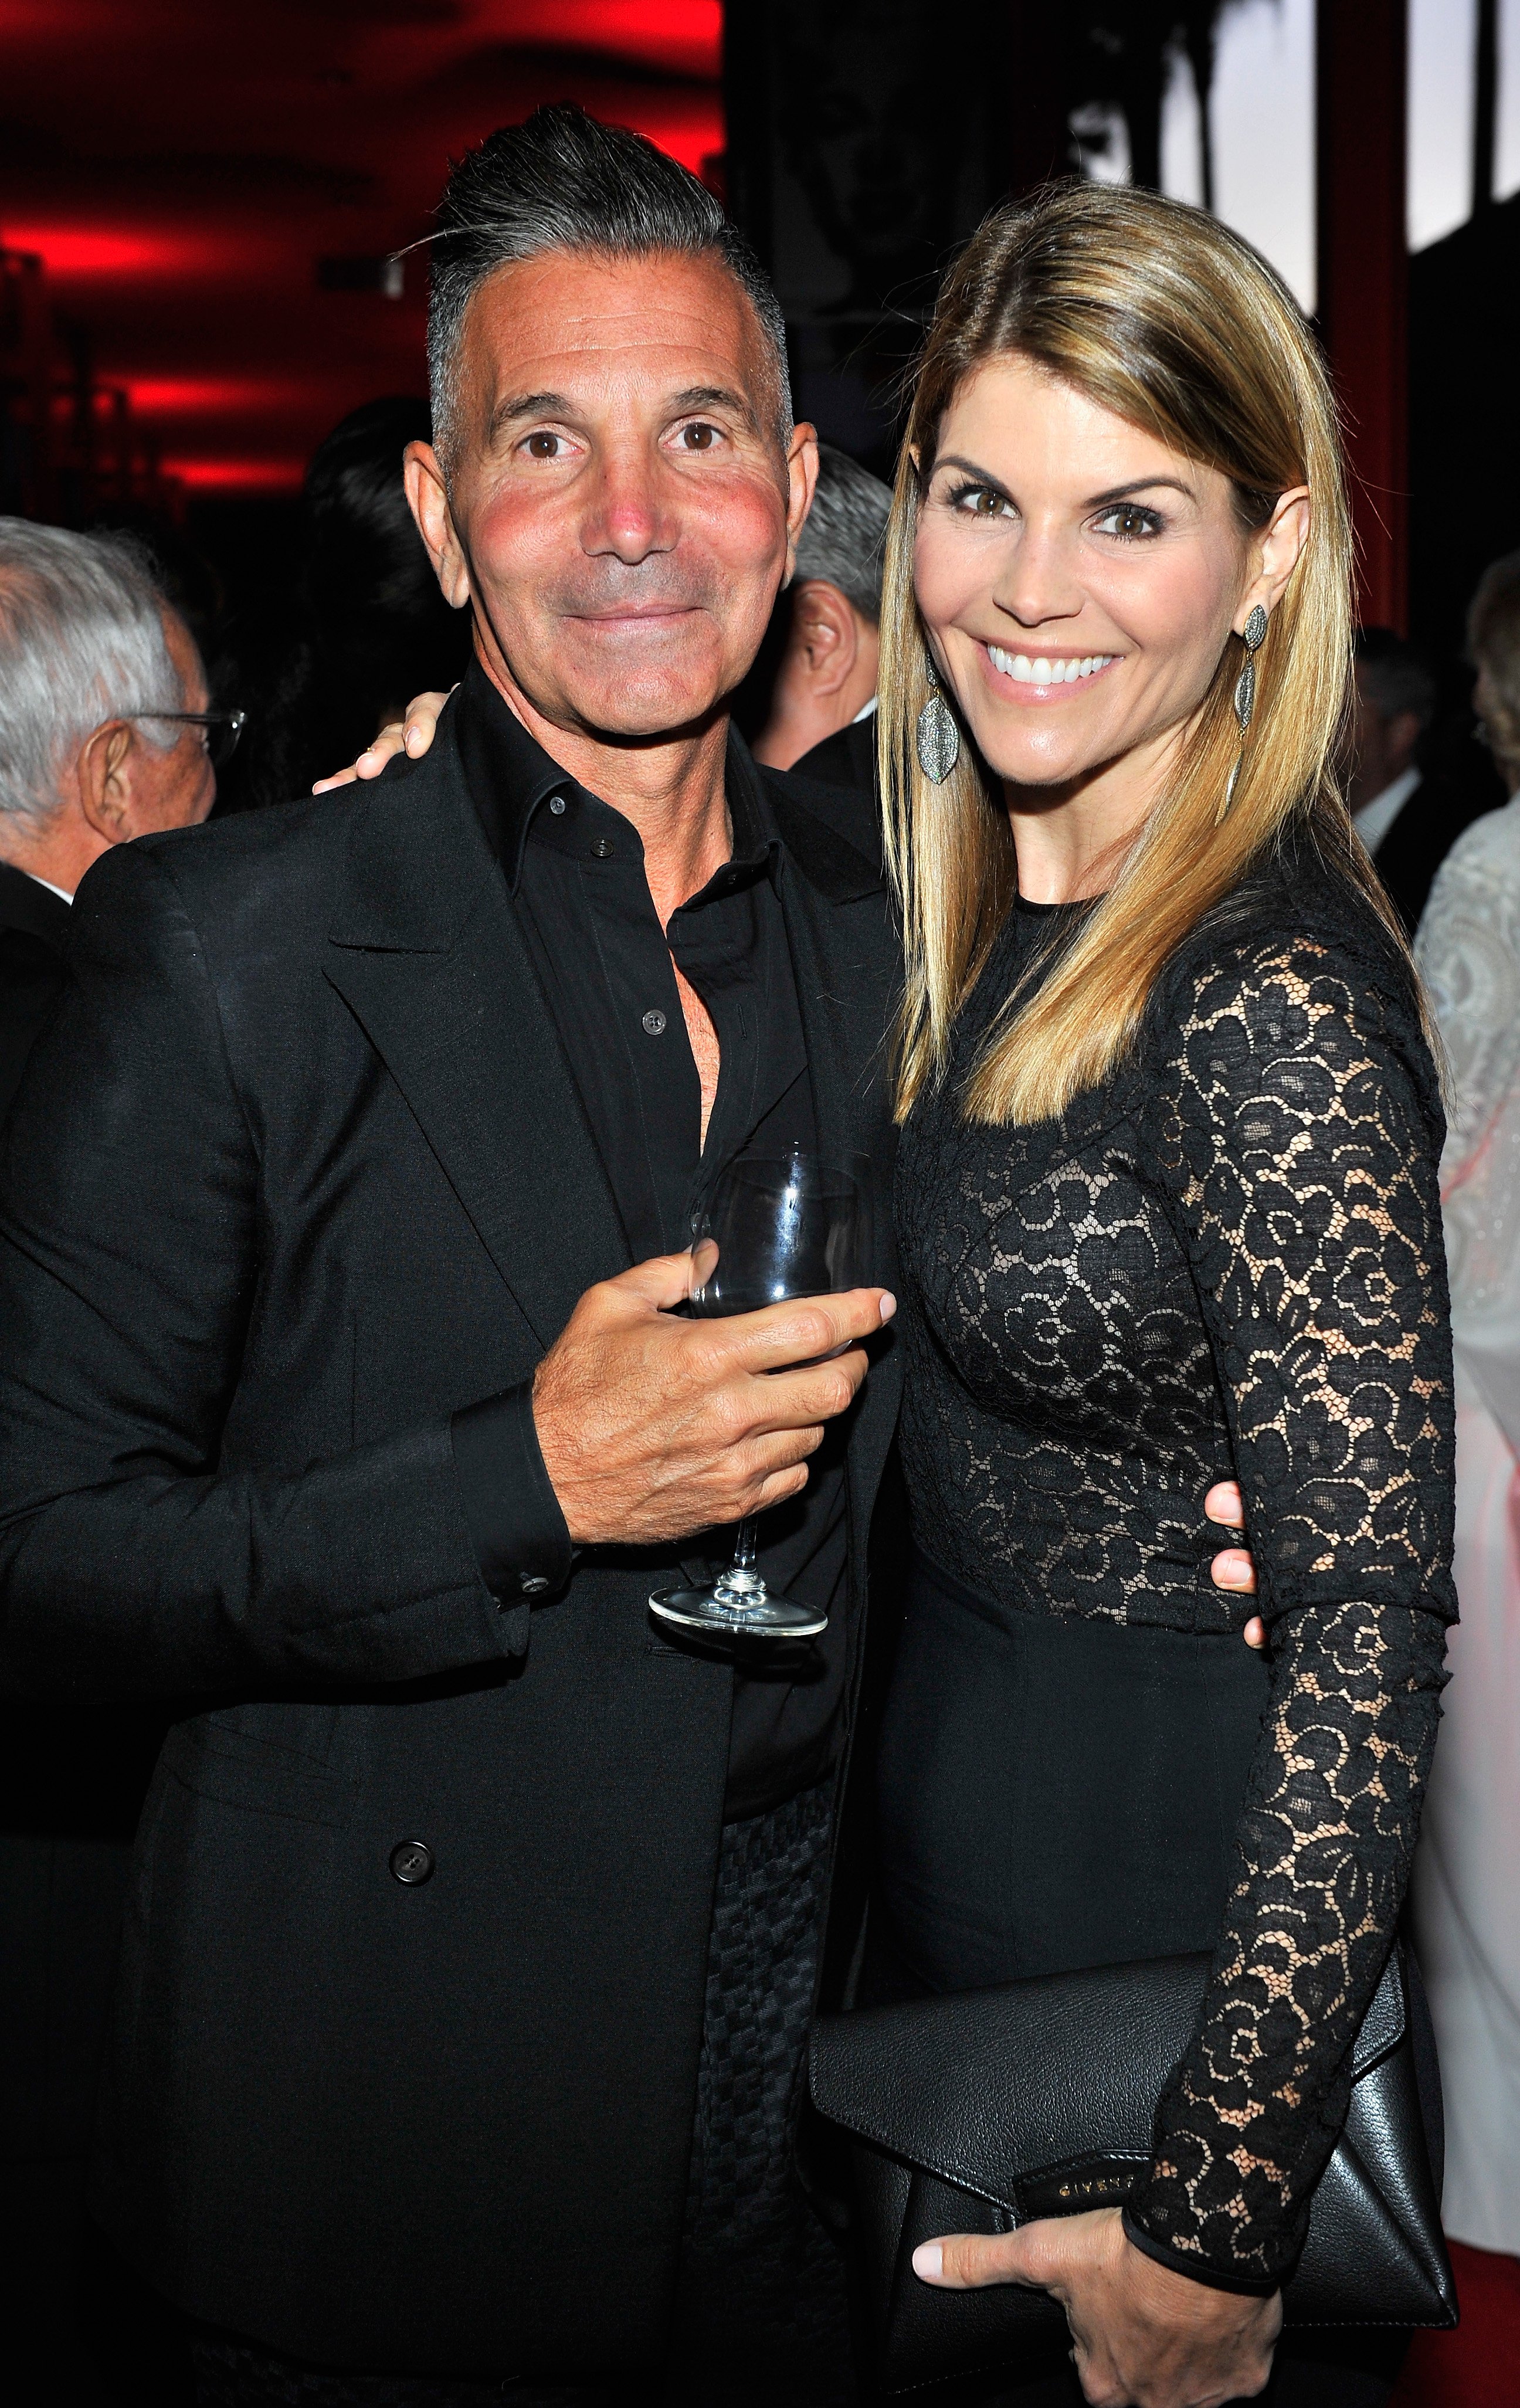 Mossimo Giannulli and Lori Loughlin attend LACMA's 50th Anniversary Gala. | Photo: GettyImages